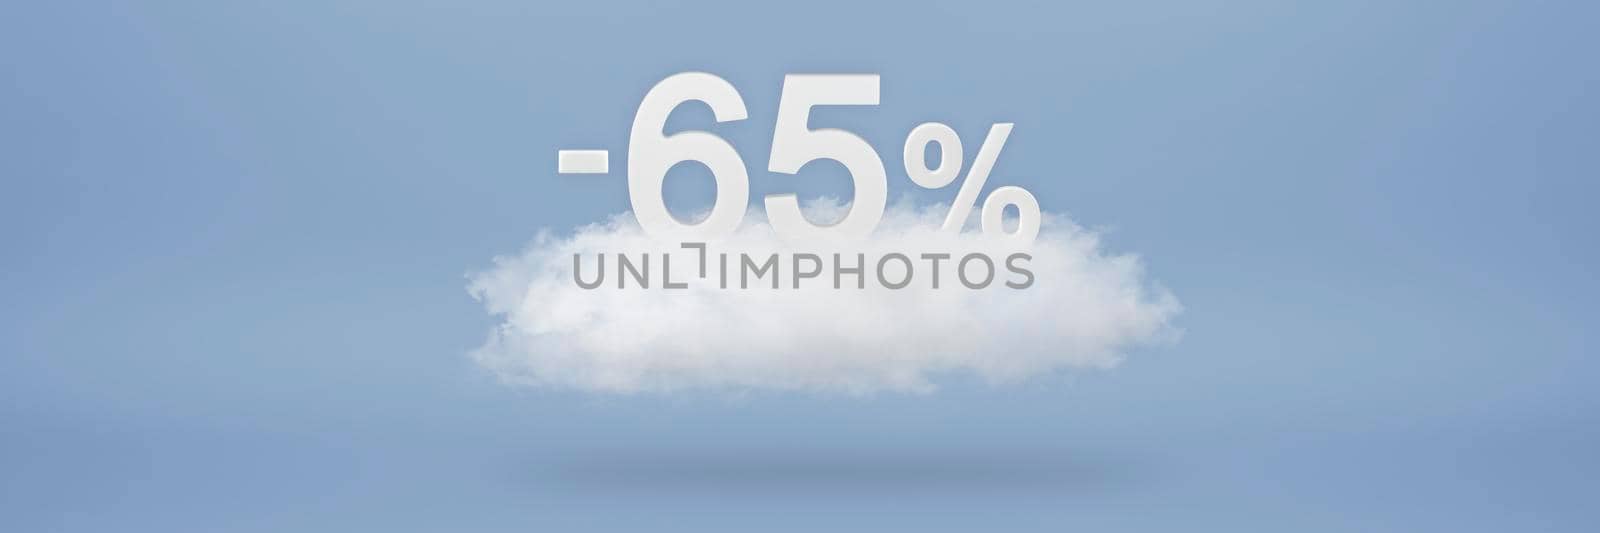 Discount 65 percent. Big discounts, sale up to sixty five percent. 3D numbers float on a cloud on a blue background. Copy space. Advertising banner and poster to be inserted into the project.